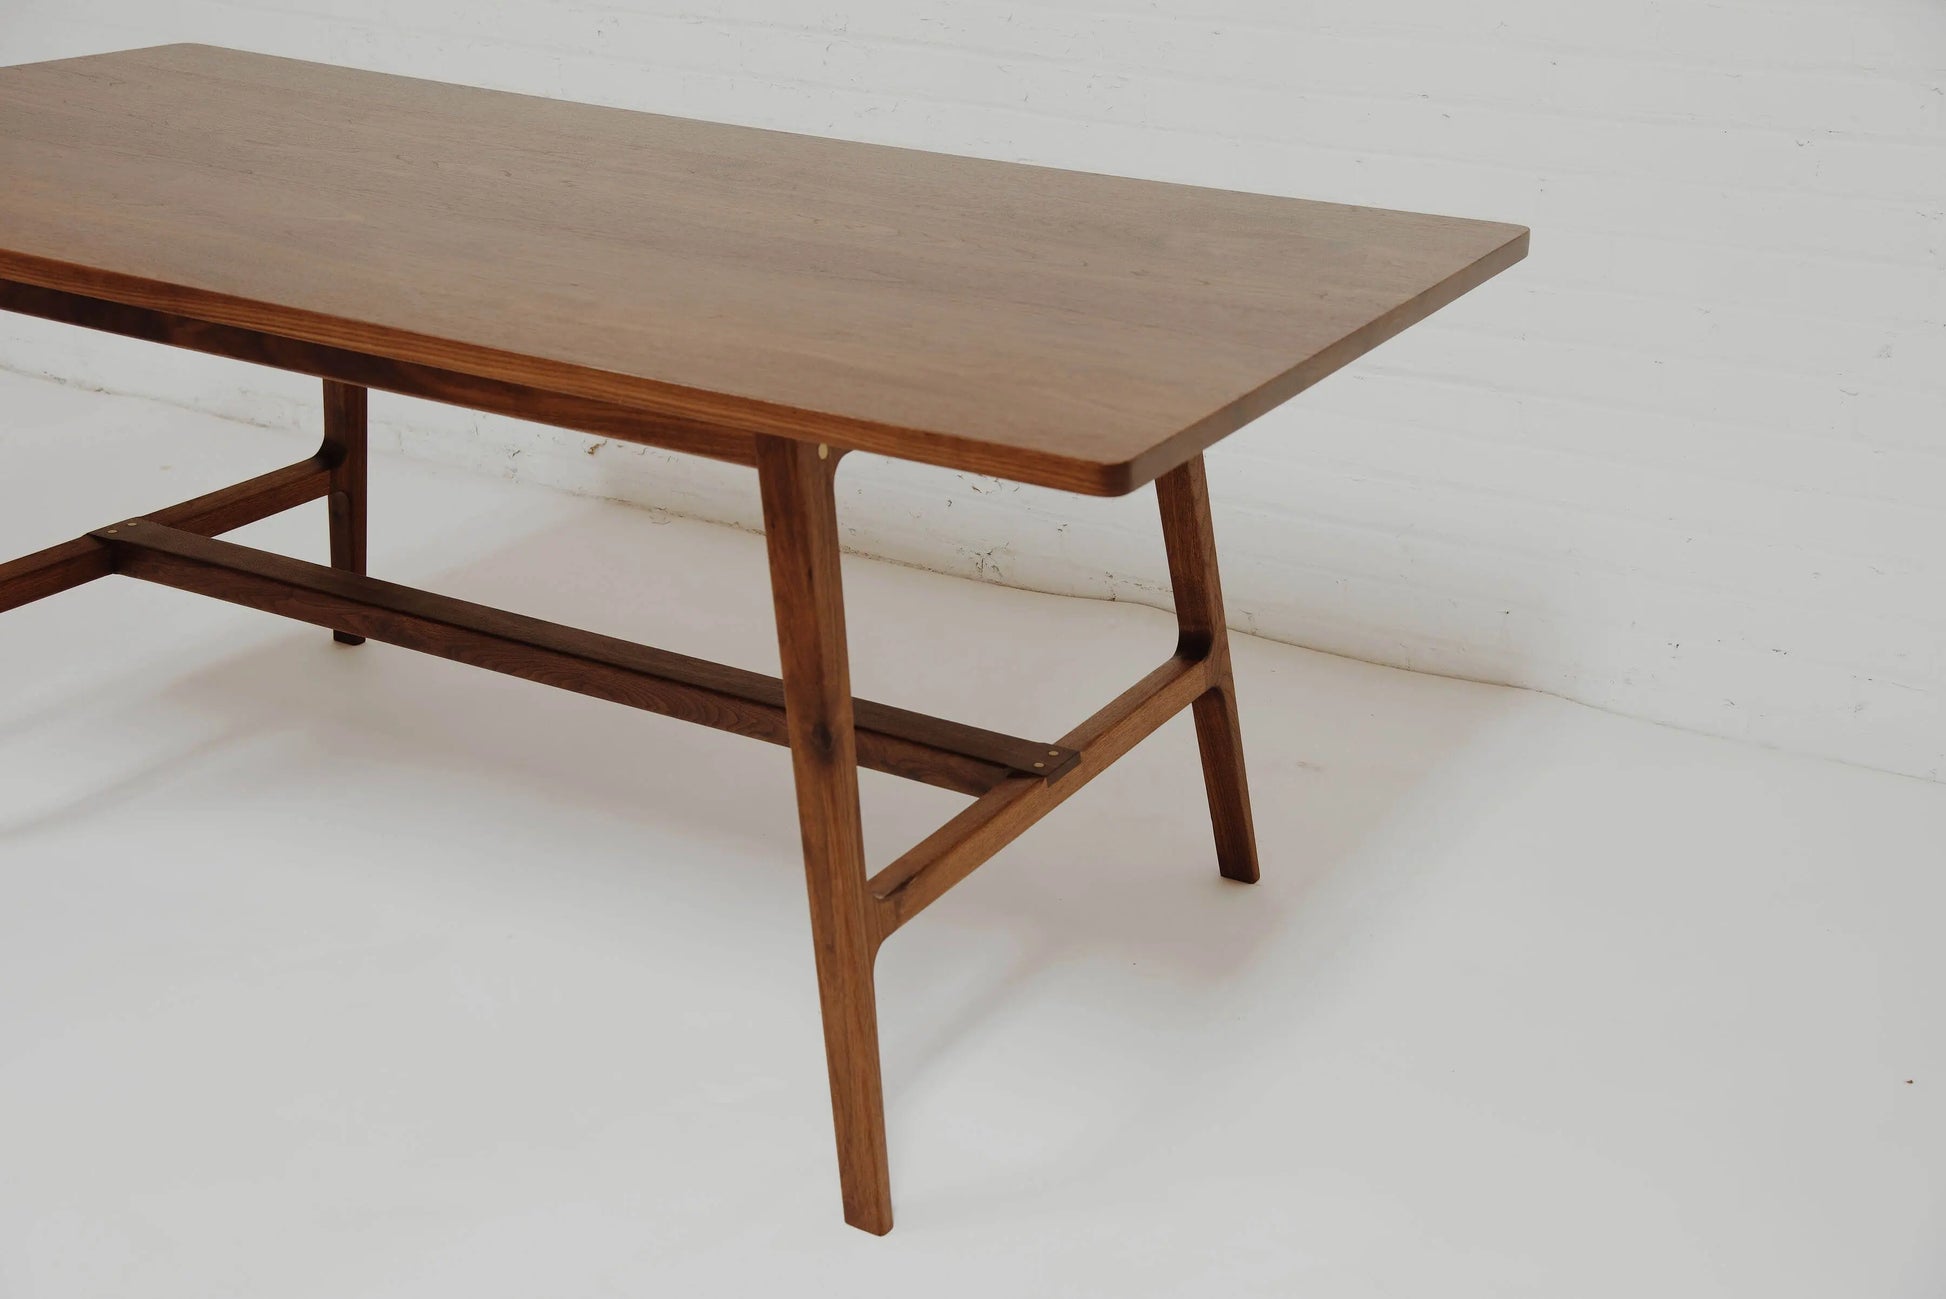 Nordic Chic: The Lucerne Scandinavian Dining Table